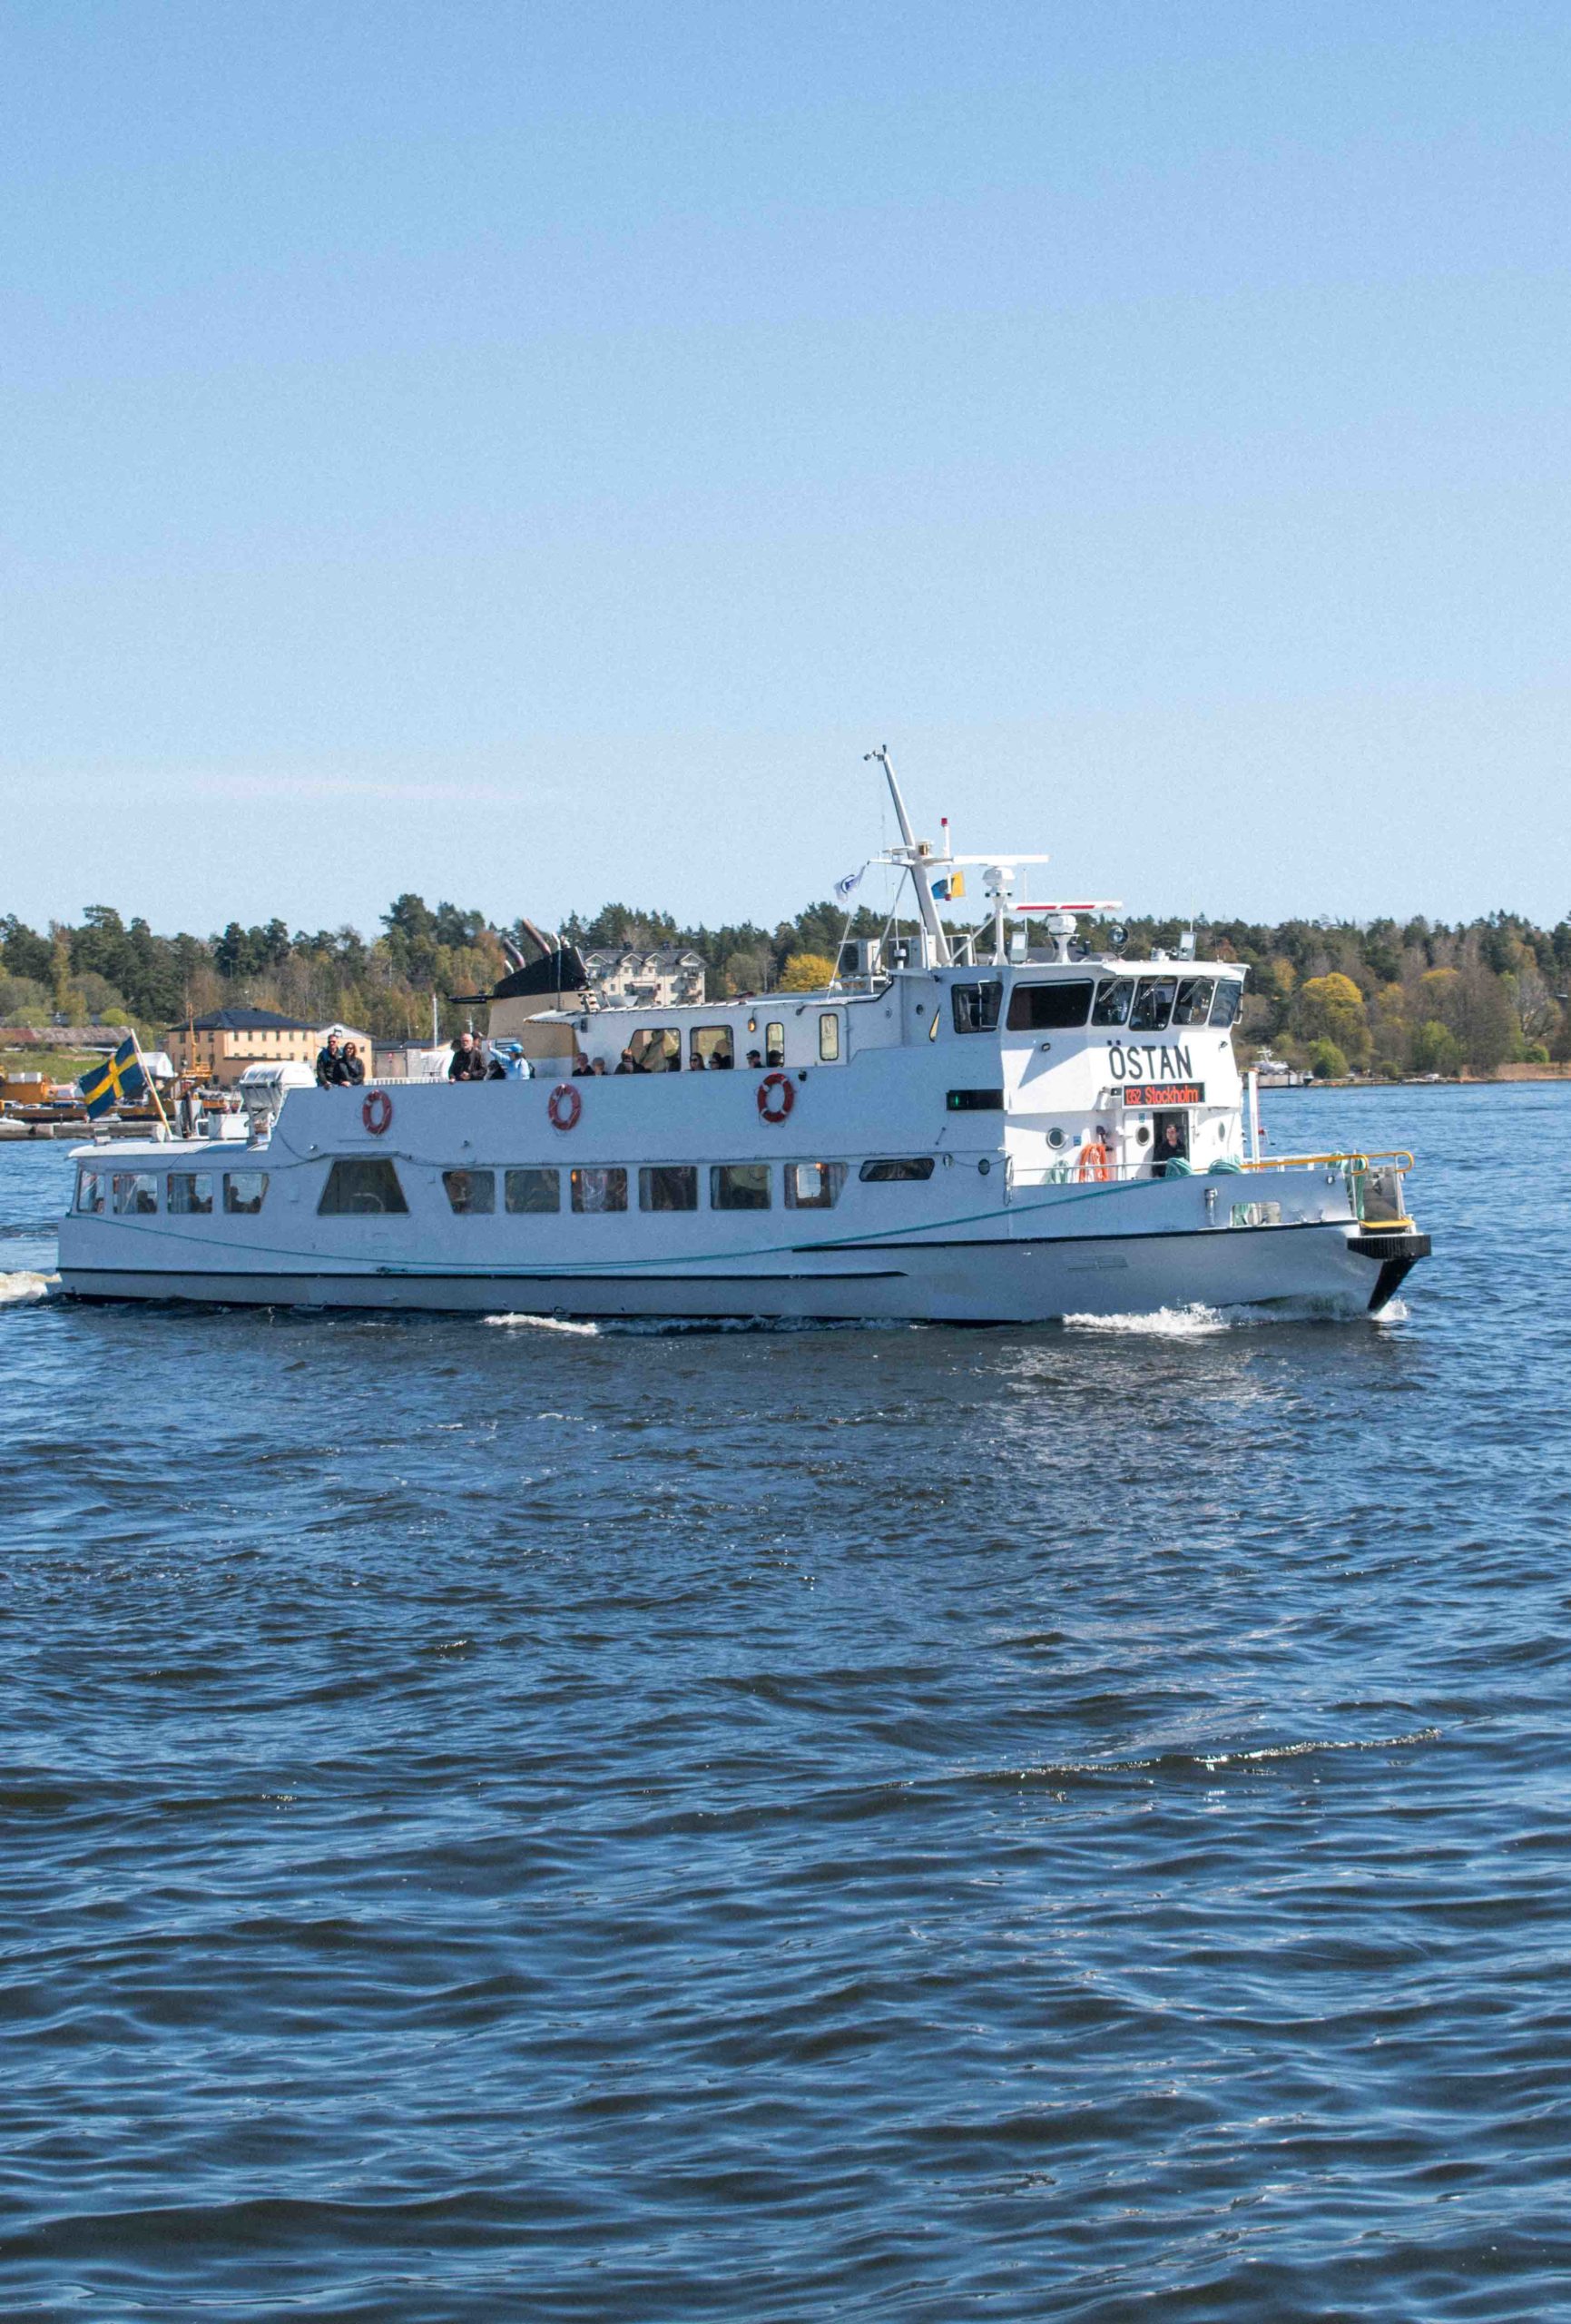 How to get to Vaxholm from Stockholm